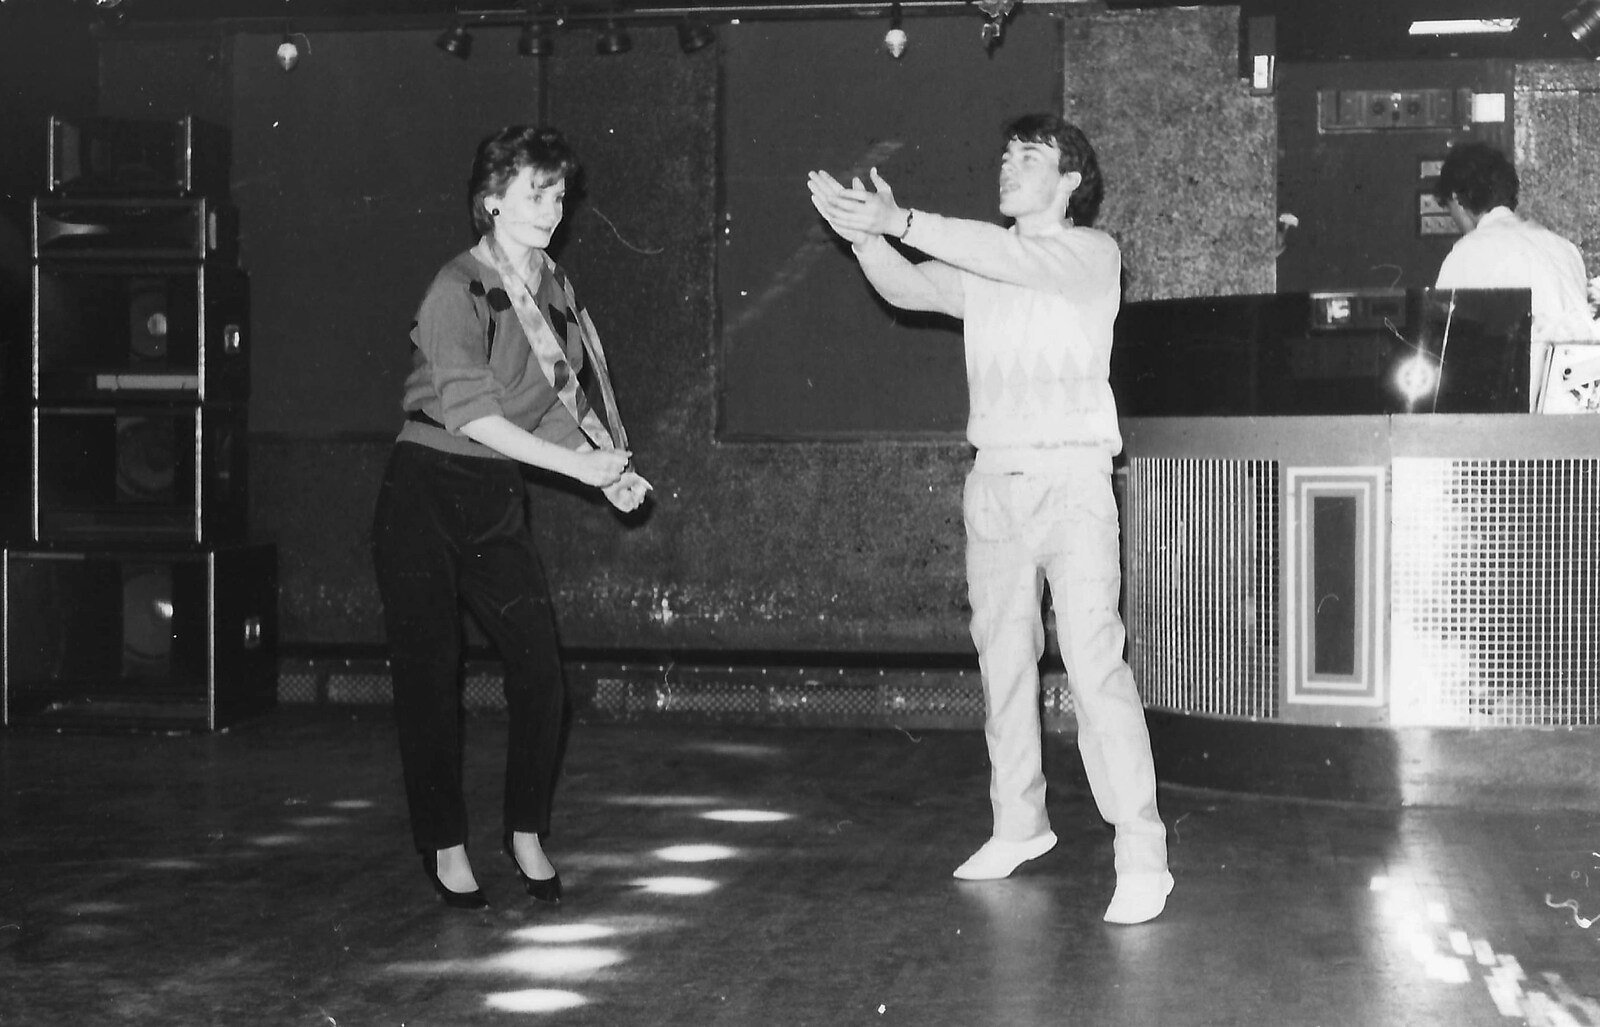 Dave Masterson dancing in Snobs from Uni: The First Year in Black and White, Plymouth Polytechnic, Devon - 8th April 1986